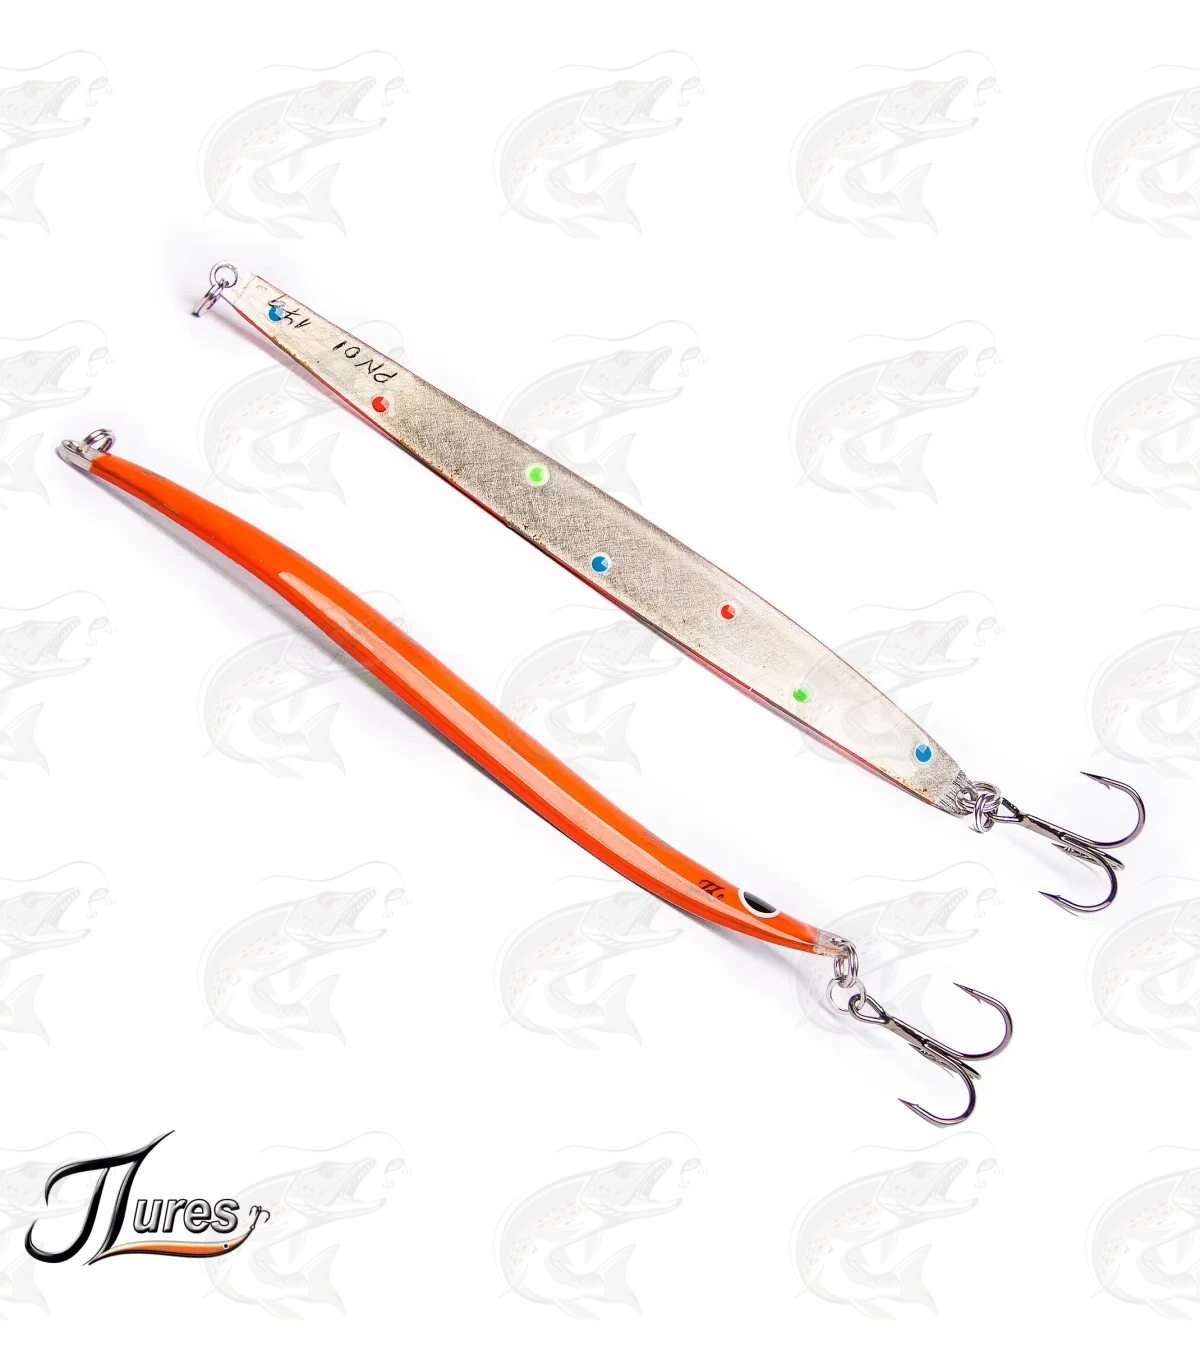 T.Lures Hybrid Sandeel seatrout lure